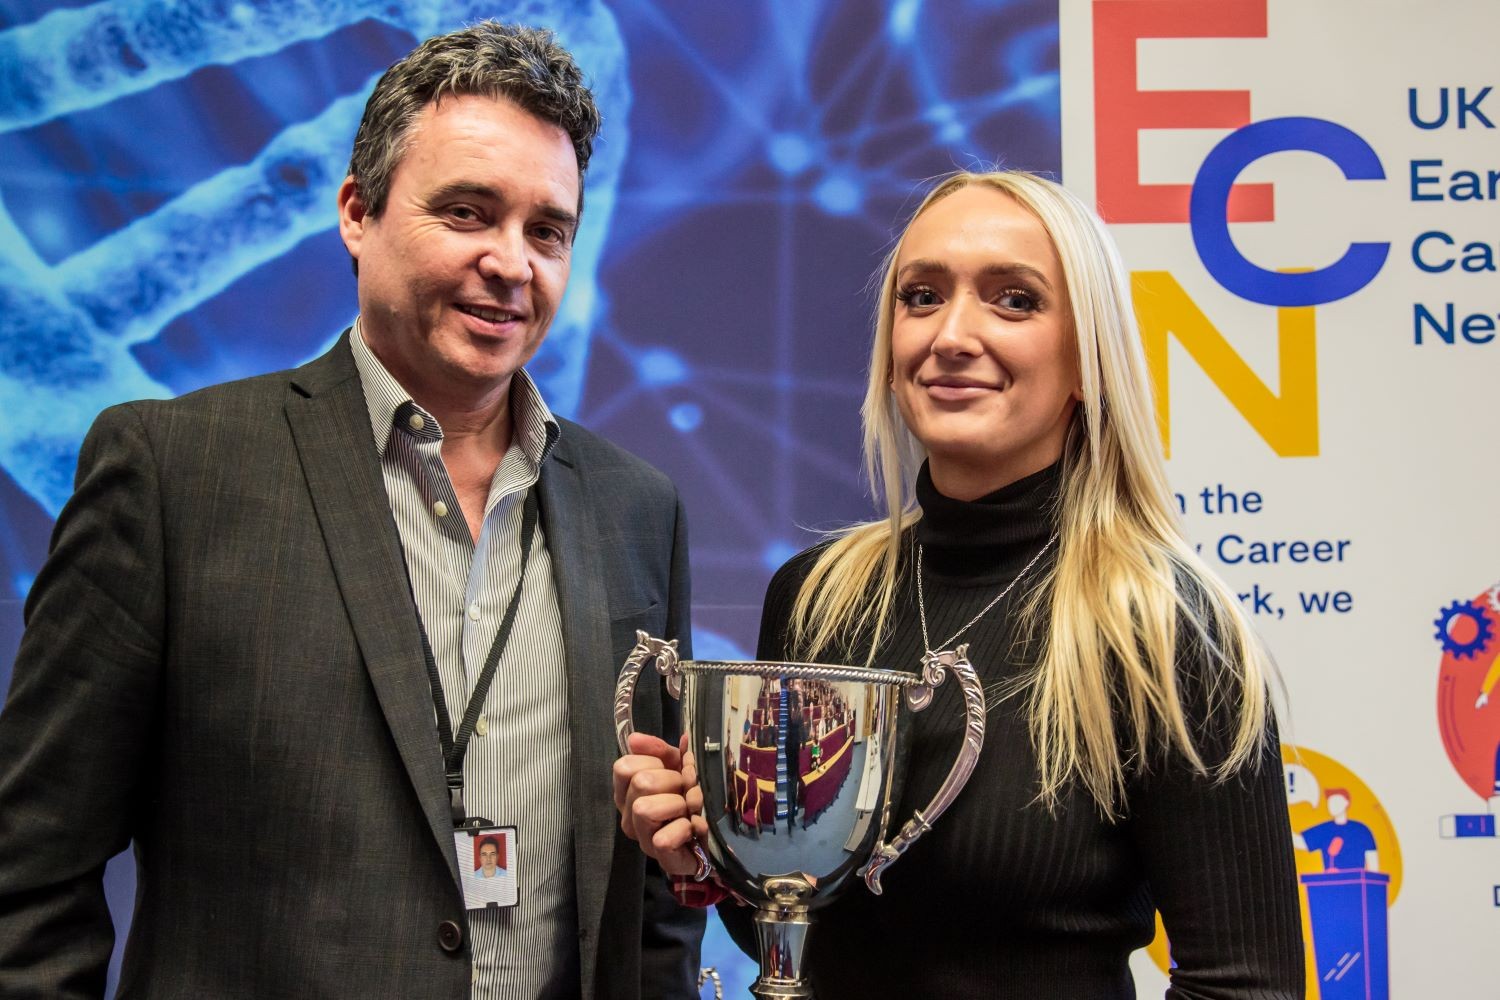 Daresbury Laboratory Apprentice of the Year 2022 Cerys Hope, pictured with the Head of Daresbury Laboratory, Paul Vernon